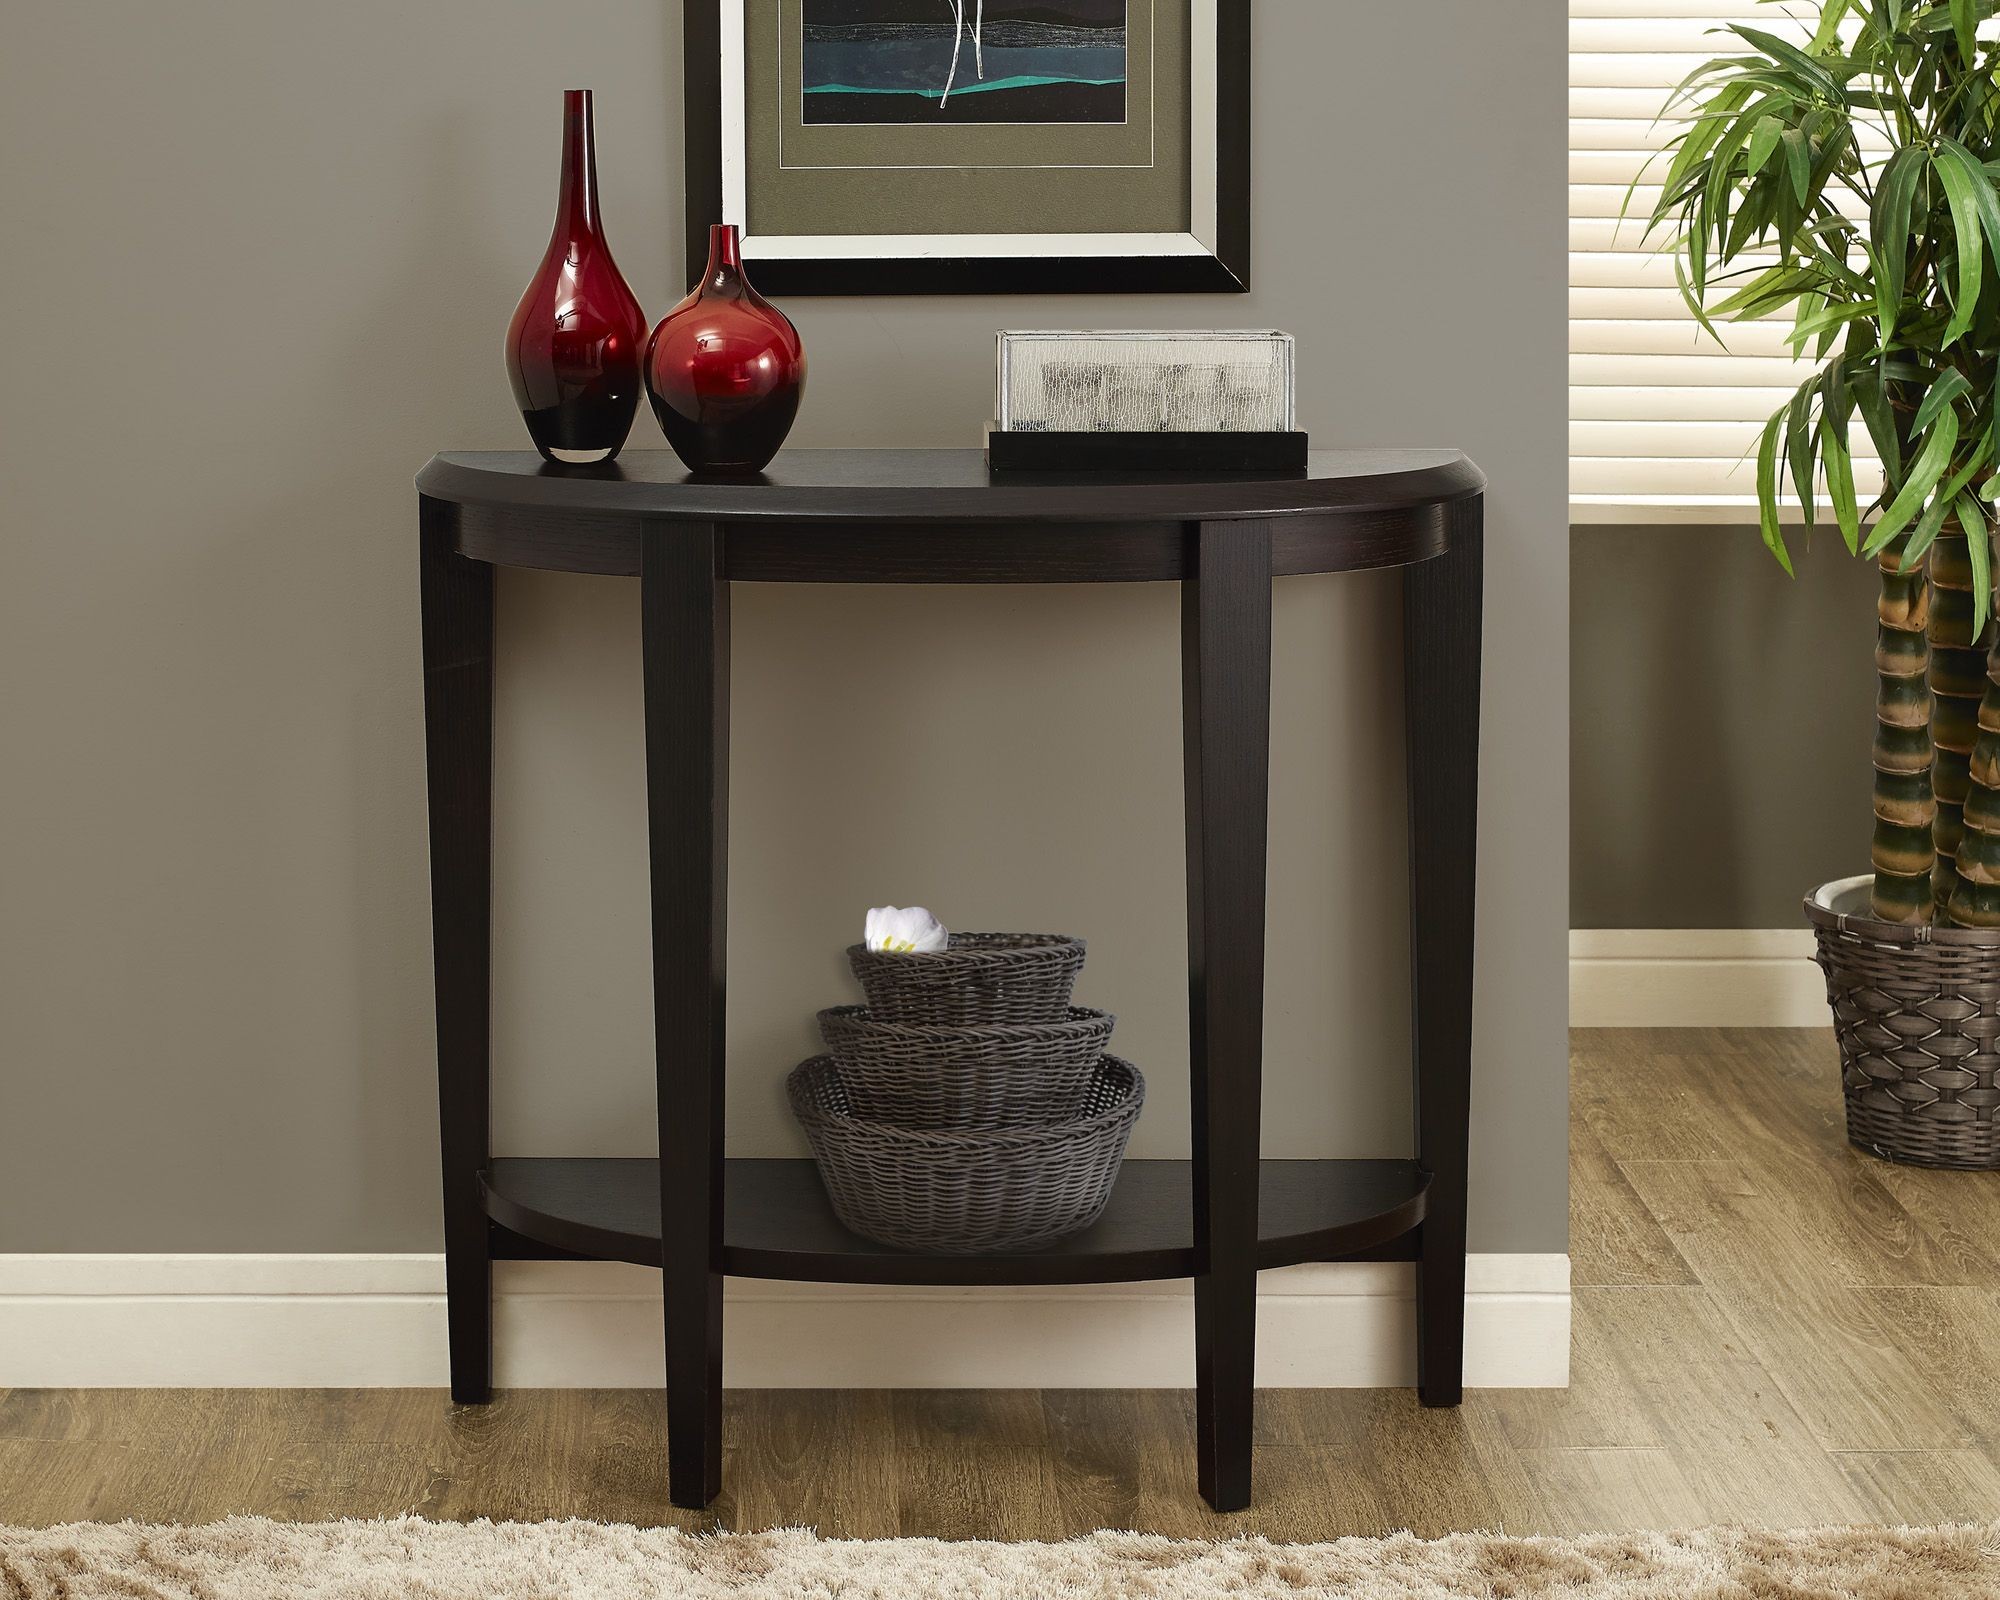 cappuccino hall console accent table from monarch coleman wine rack west elm reclaimed wood patio swing tall pedestal sofa side end bunnings garden seat black iron bedside corner